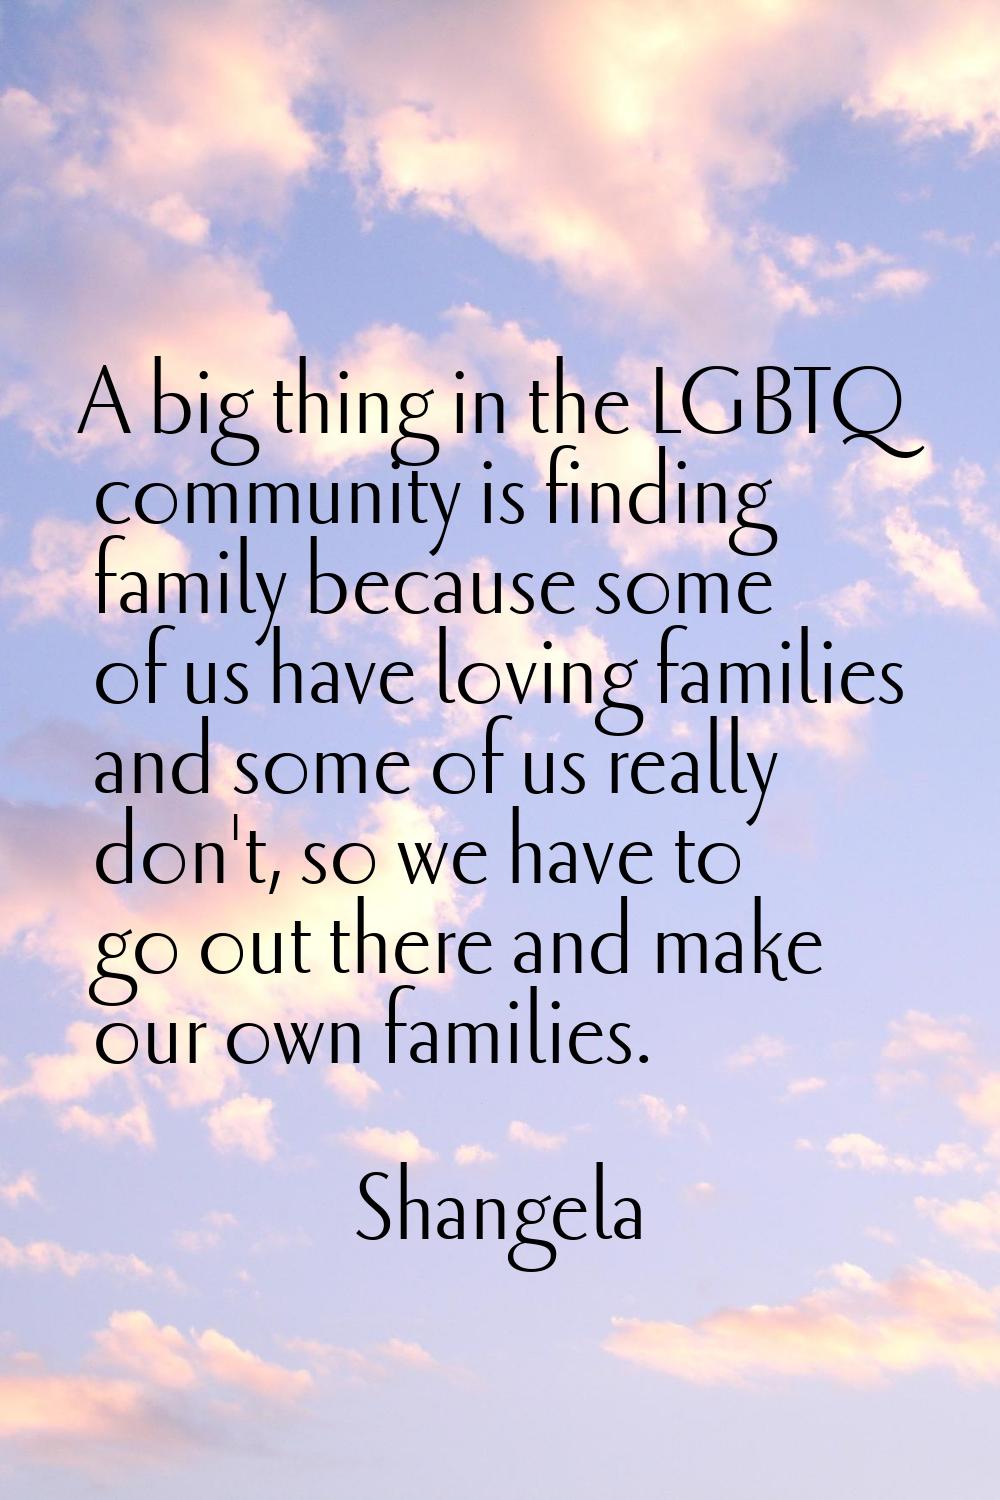 A big thing in the LGBTQ community is finding family because some of us have loving families and so